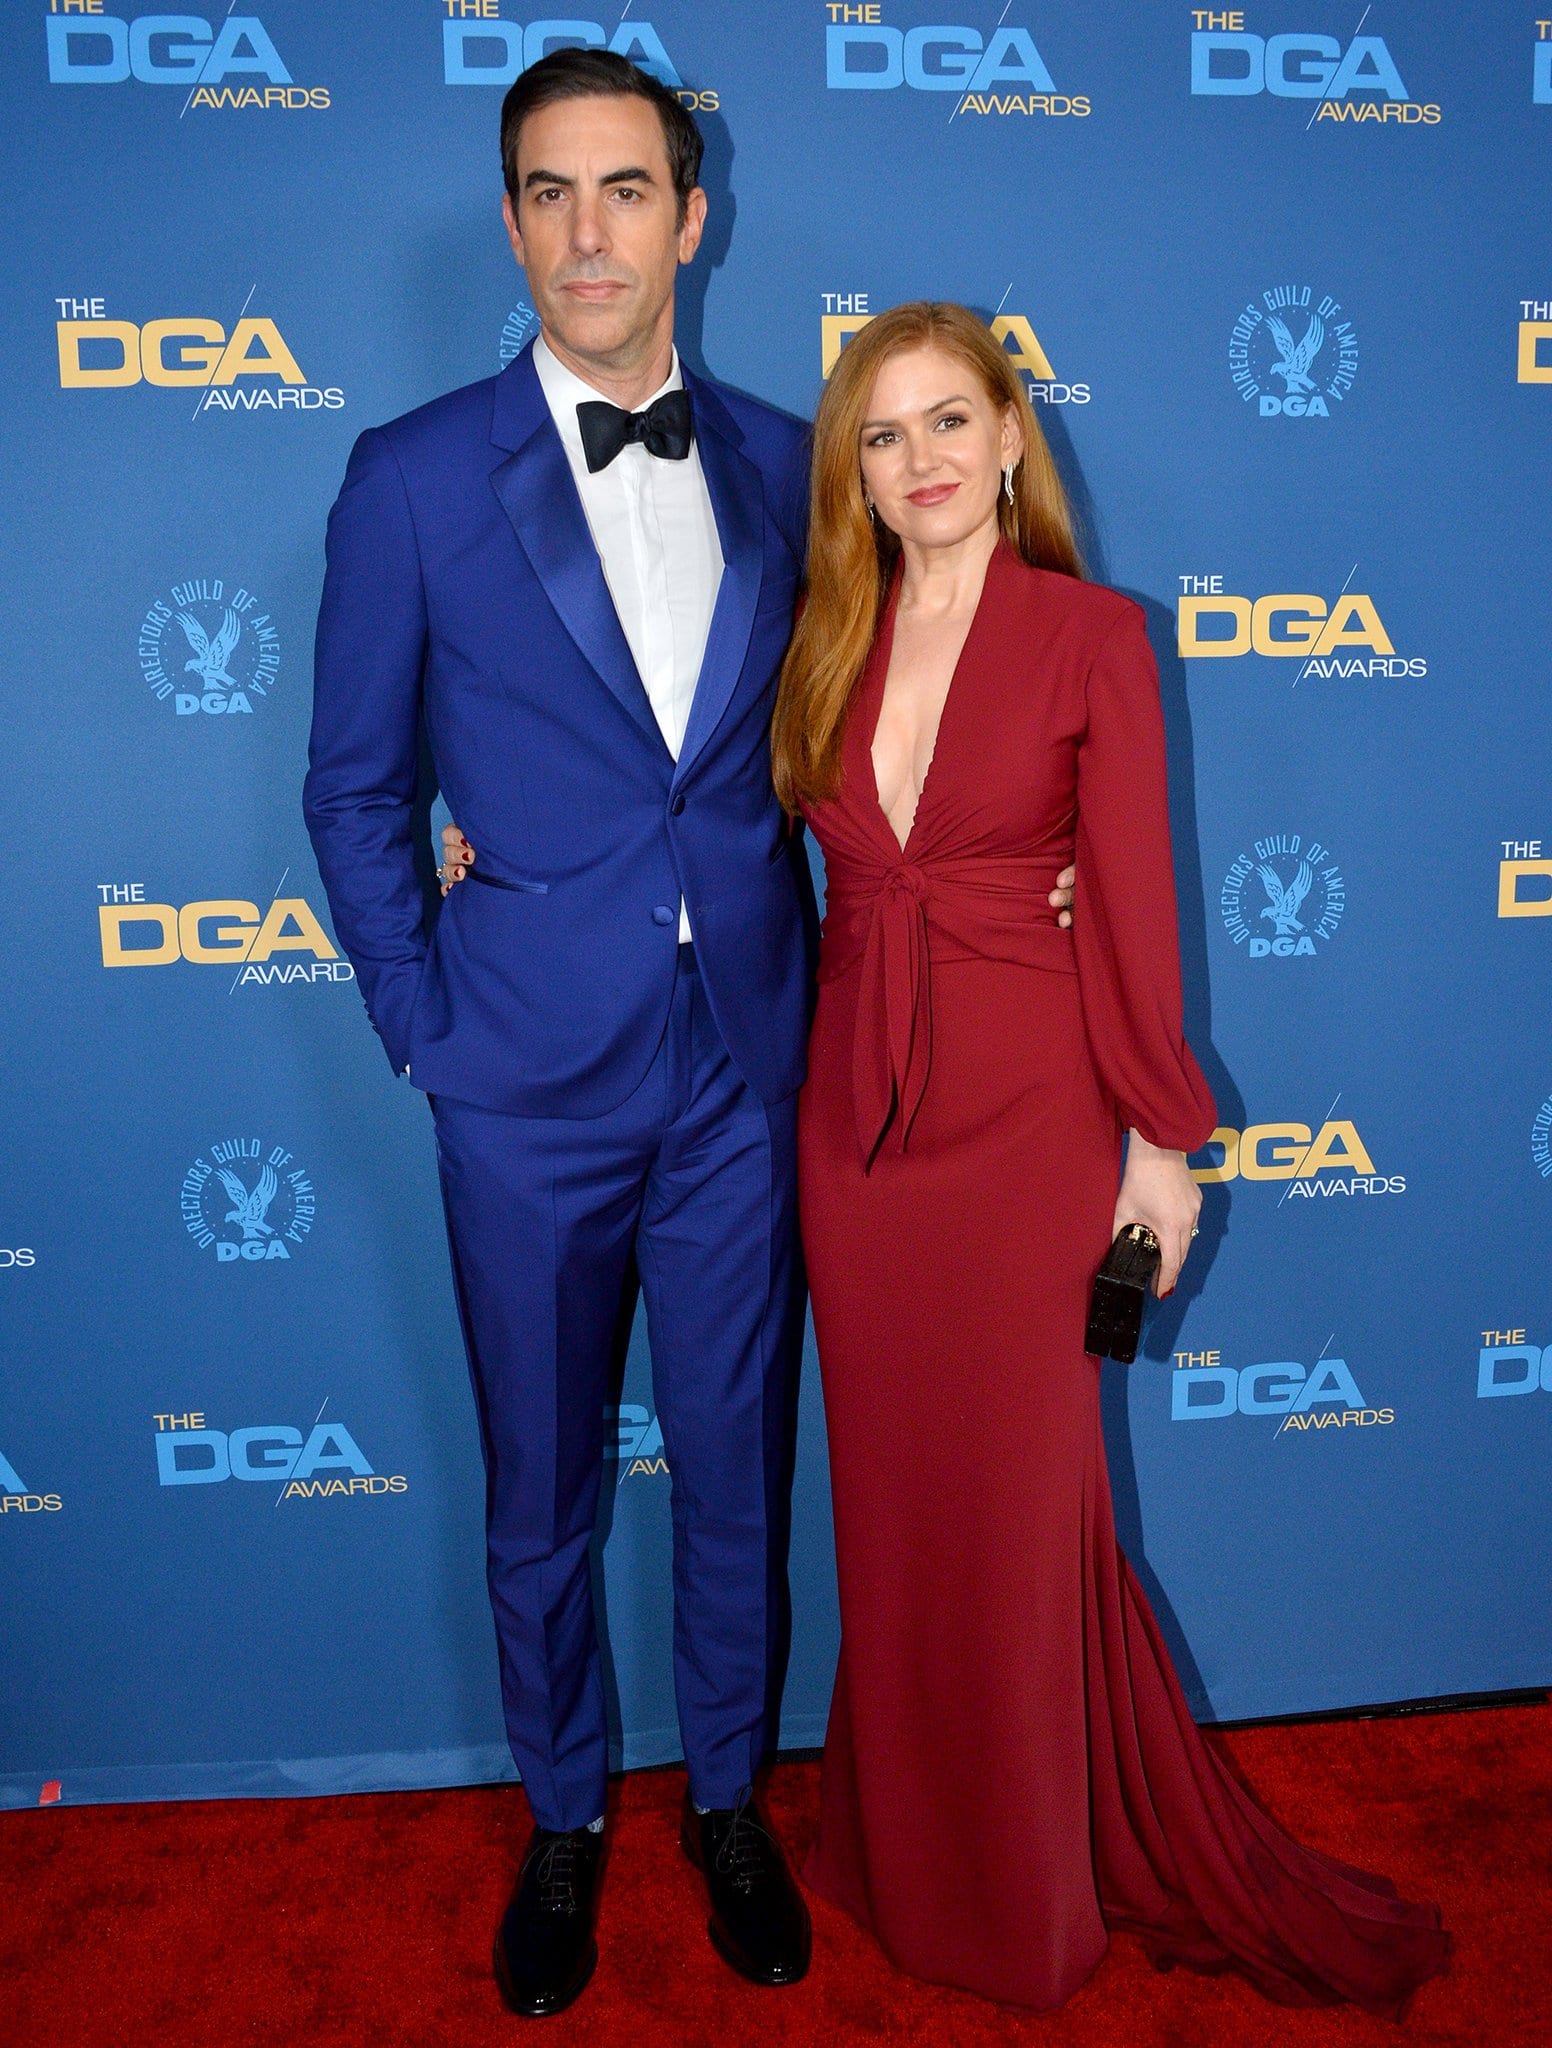 Sacha Baron Cohen and Isla Fisher at the 71st Annual Directors Guild of America Awards in 2019